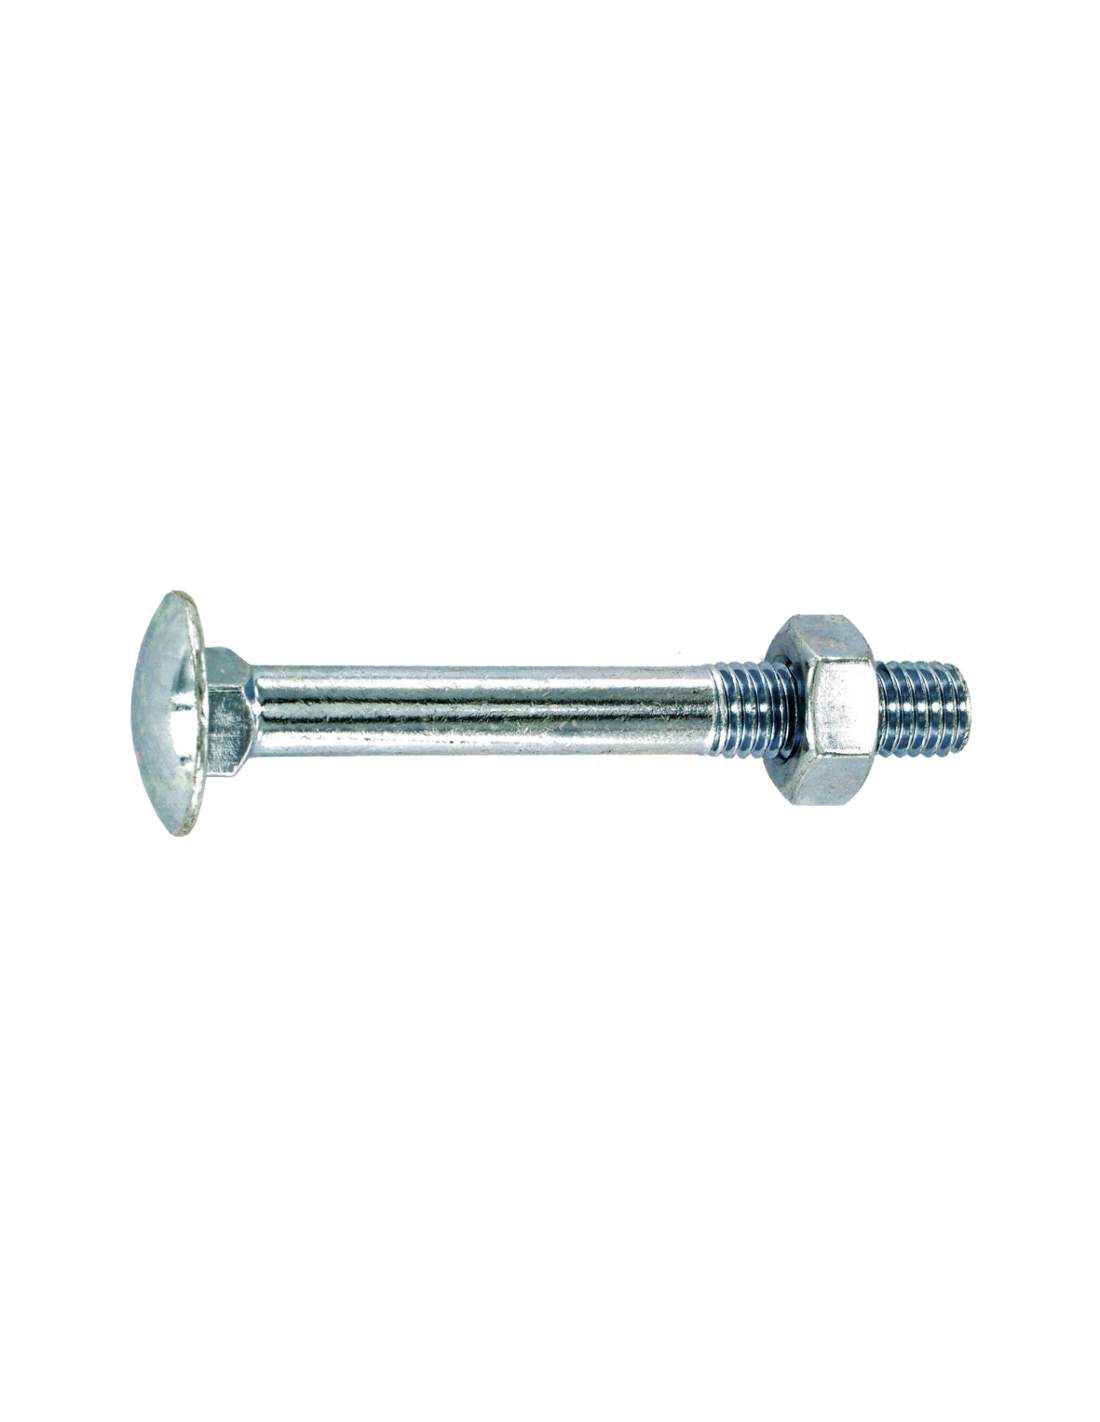 Round-head bolt with square collar in galvanized steel 6x60mm, 4 pcs.